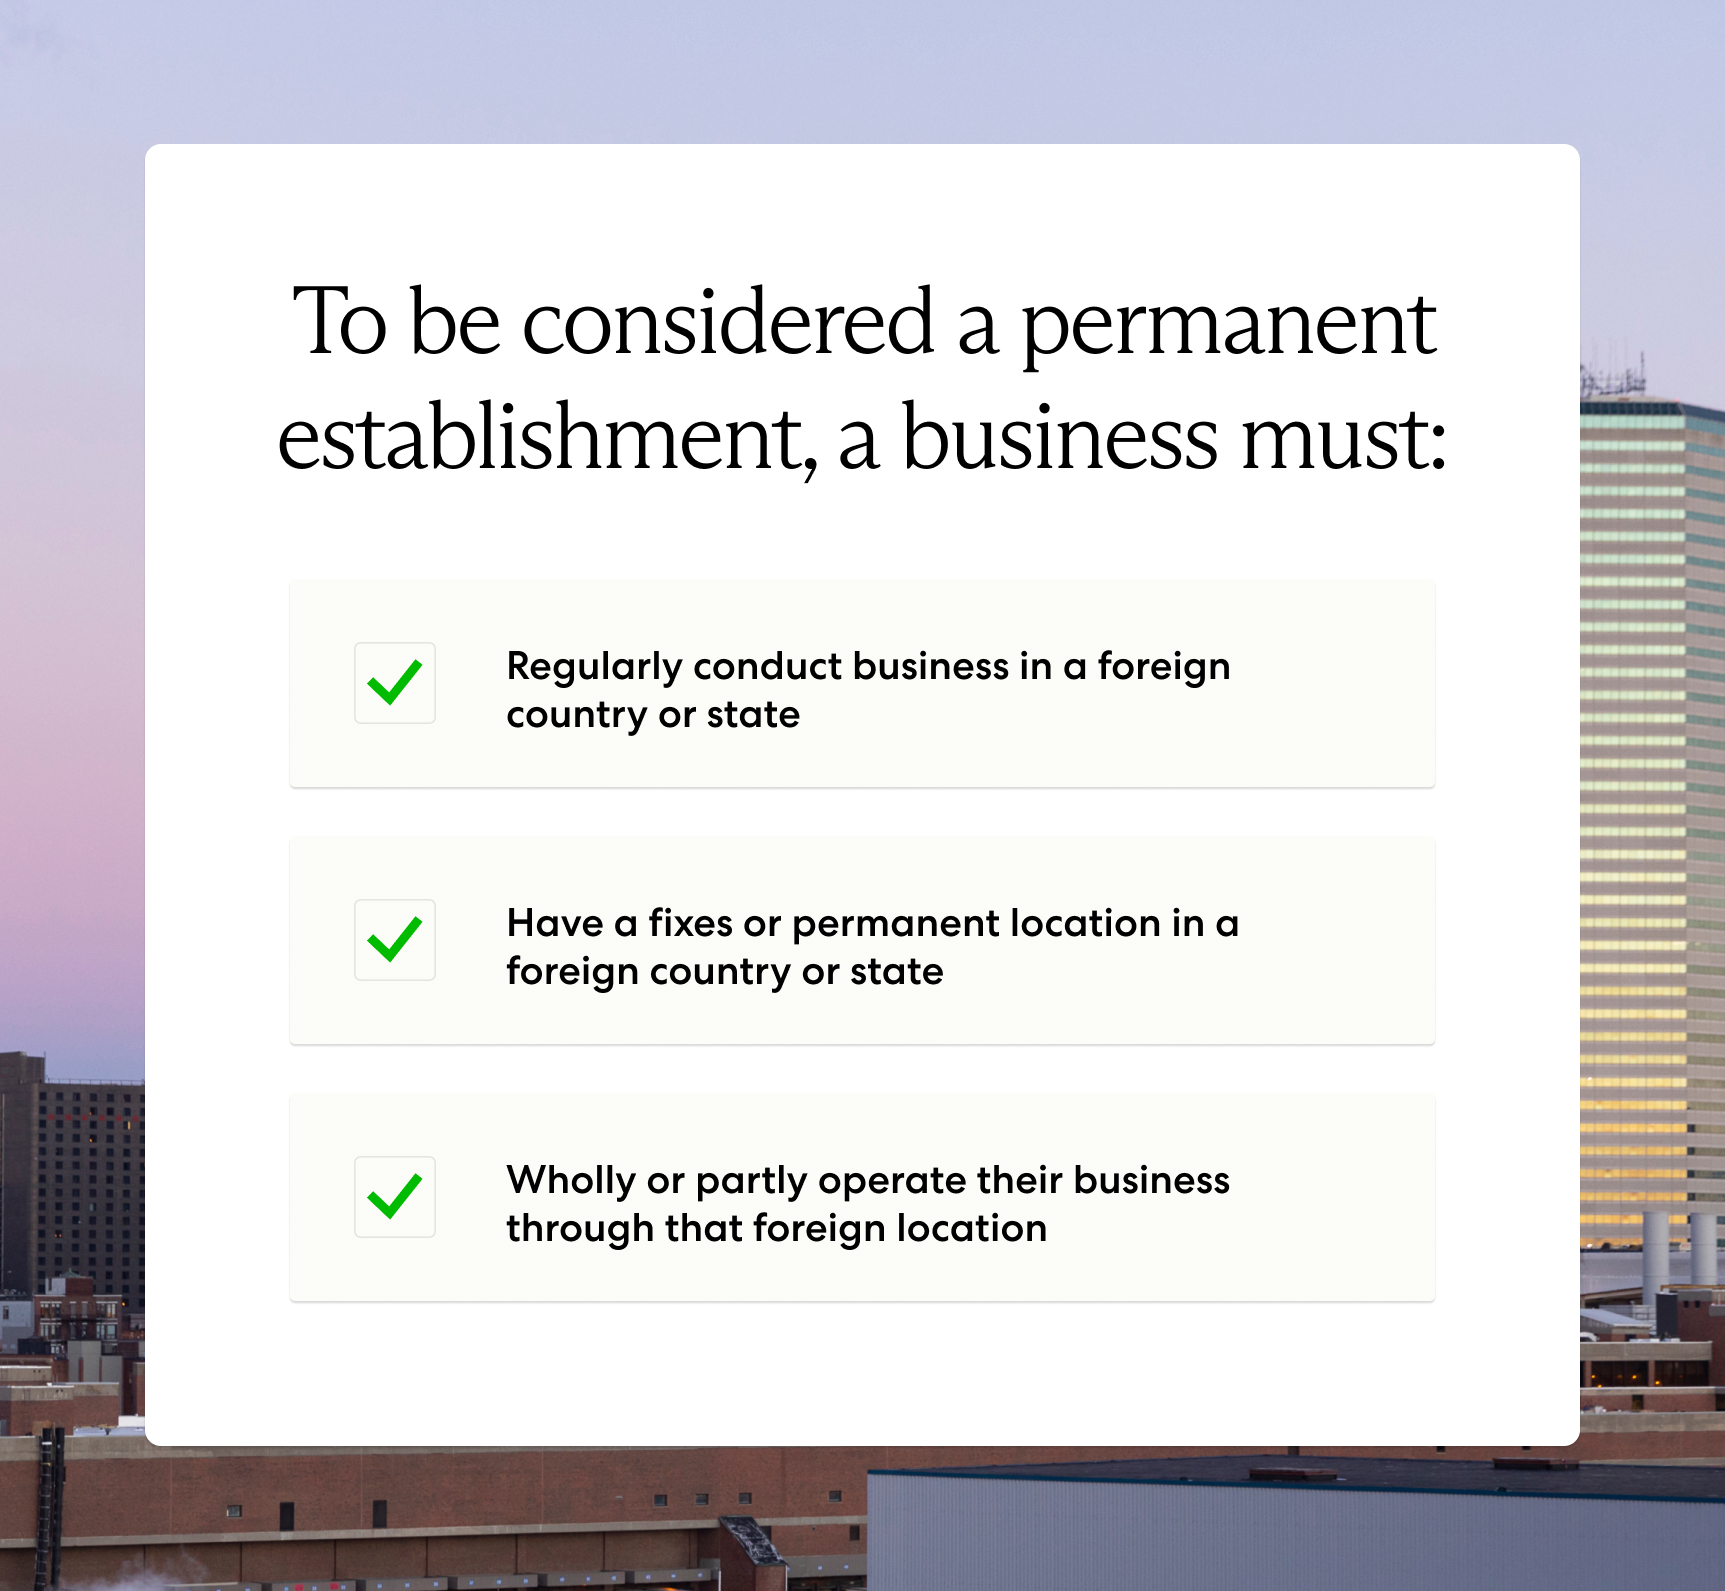 Graphic illustrating how a business can be considered a permanent establishment